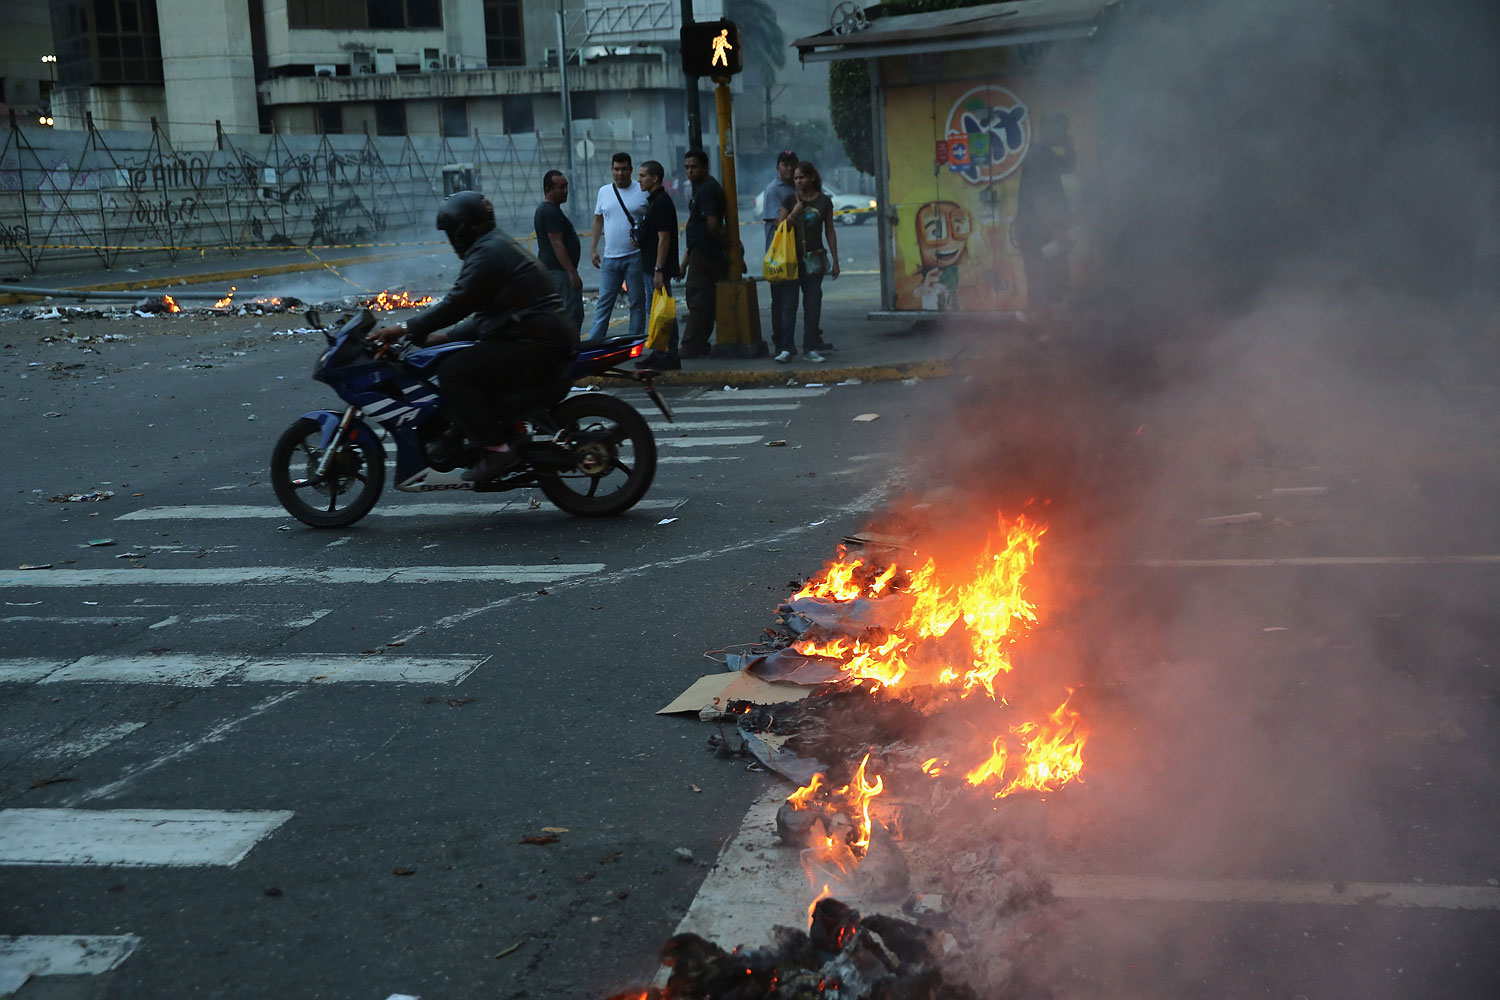 A motorcyclist rides through burning debris after an anti-government demonstration on Feb. 27, 2014 in Caracas.